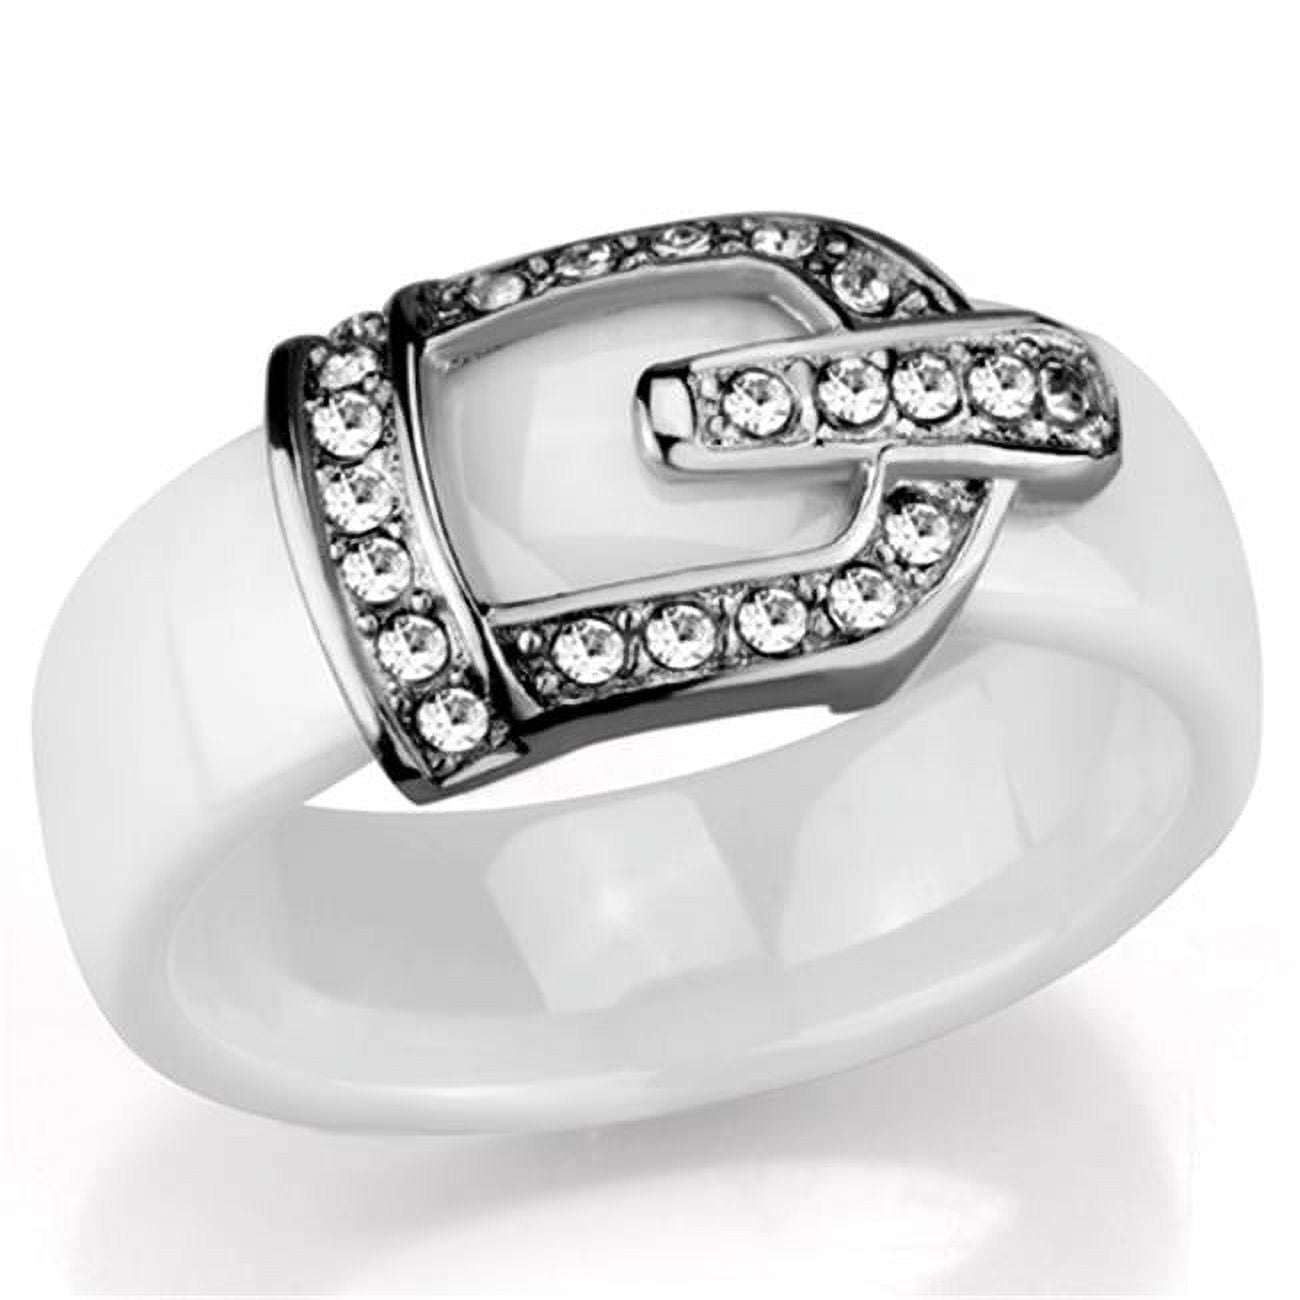 Picture of Alamode 3W955-7 Women High Polished Stainless Steel Ring with Ceramic in White - Size 7